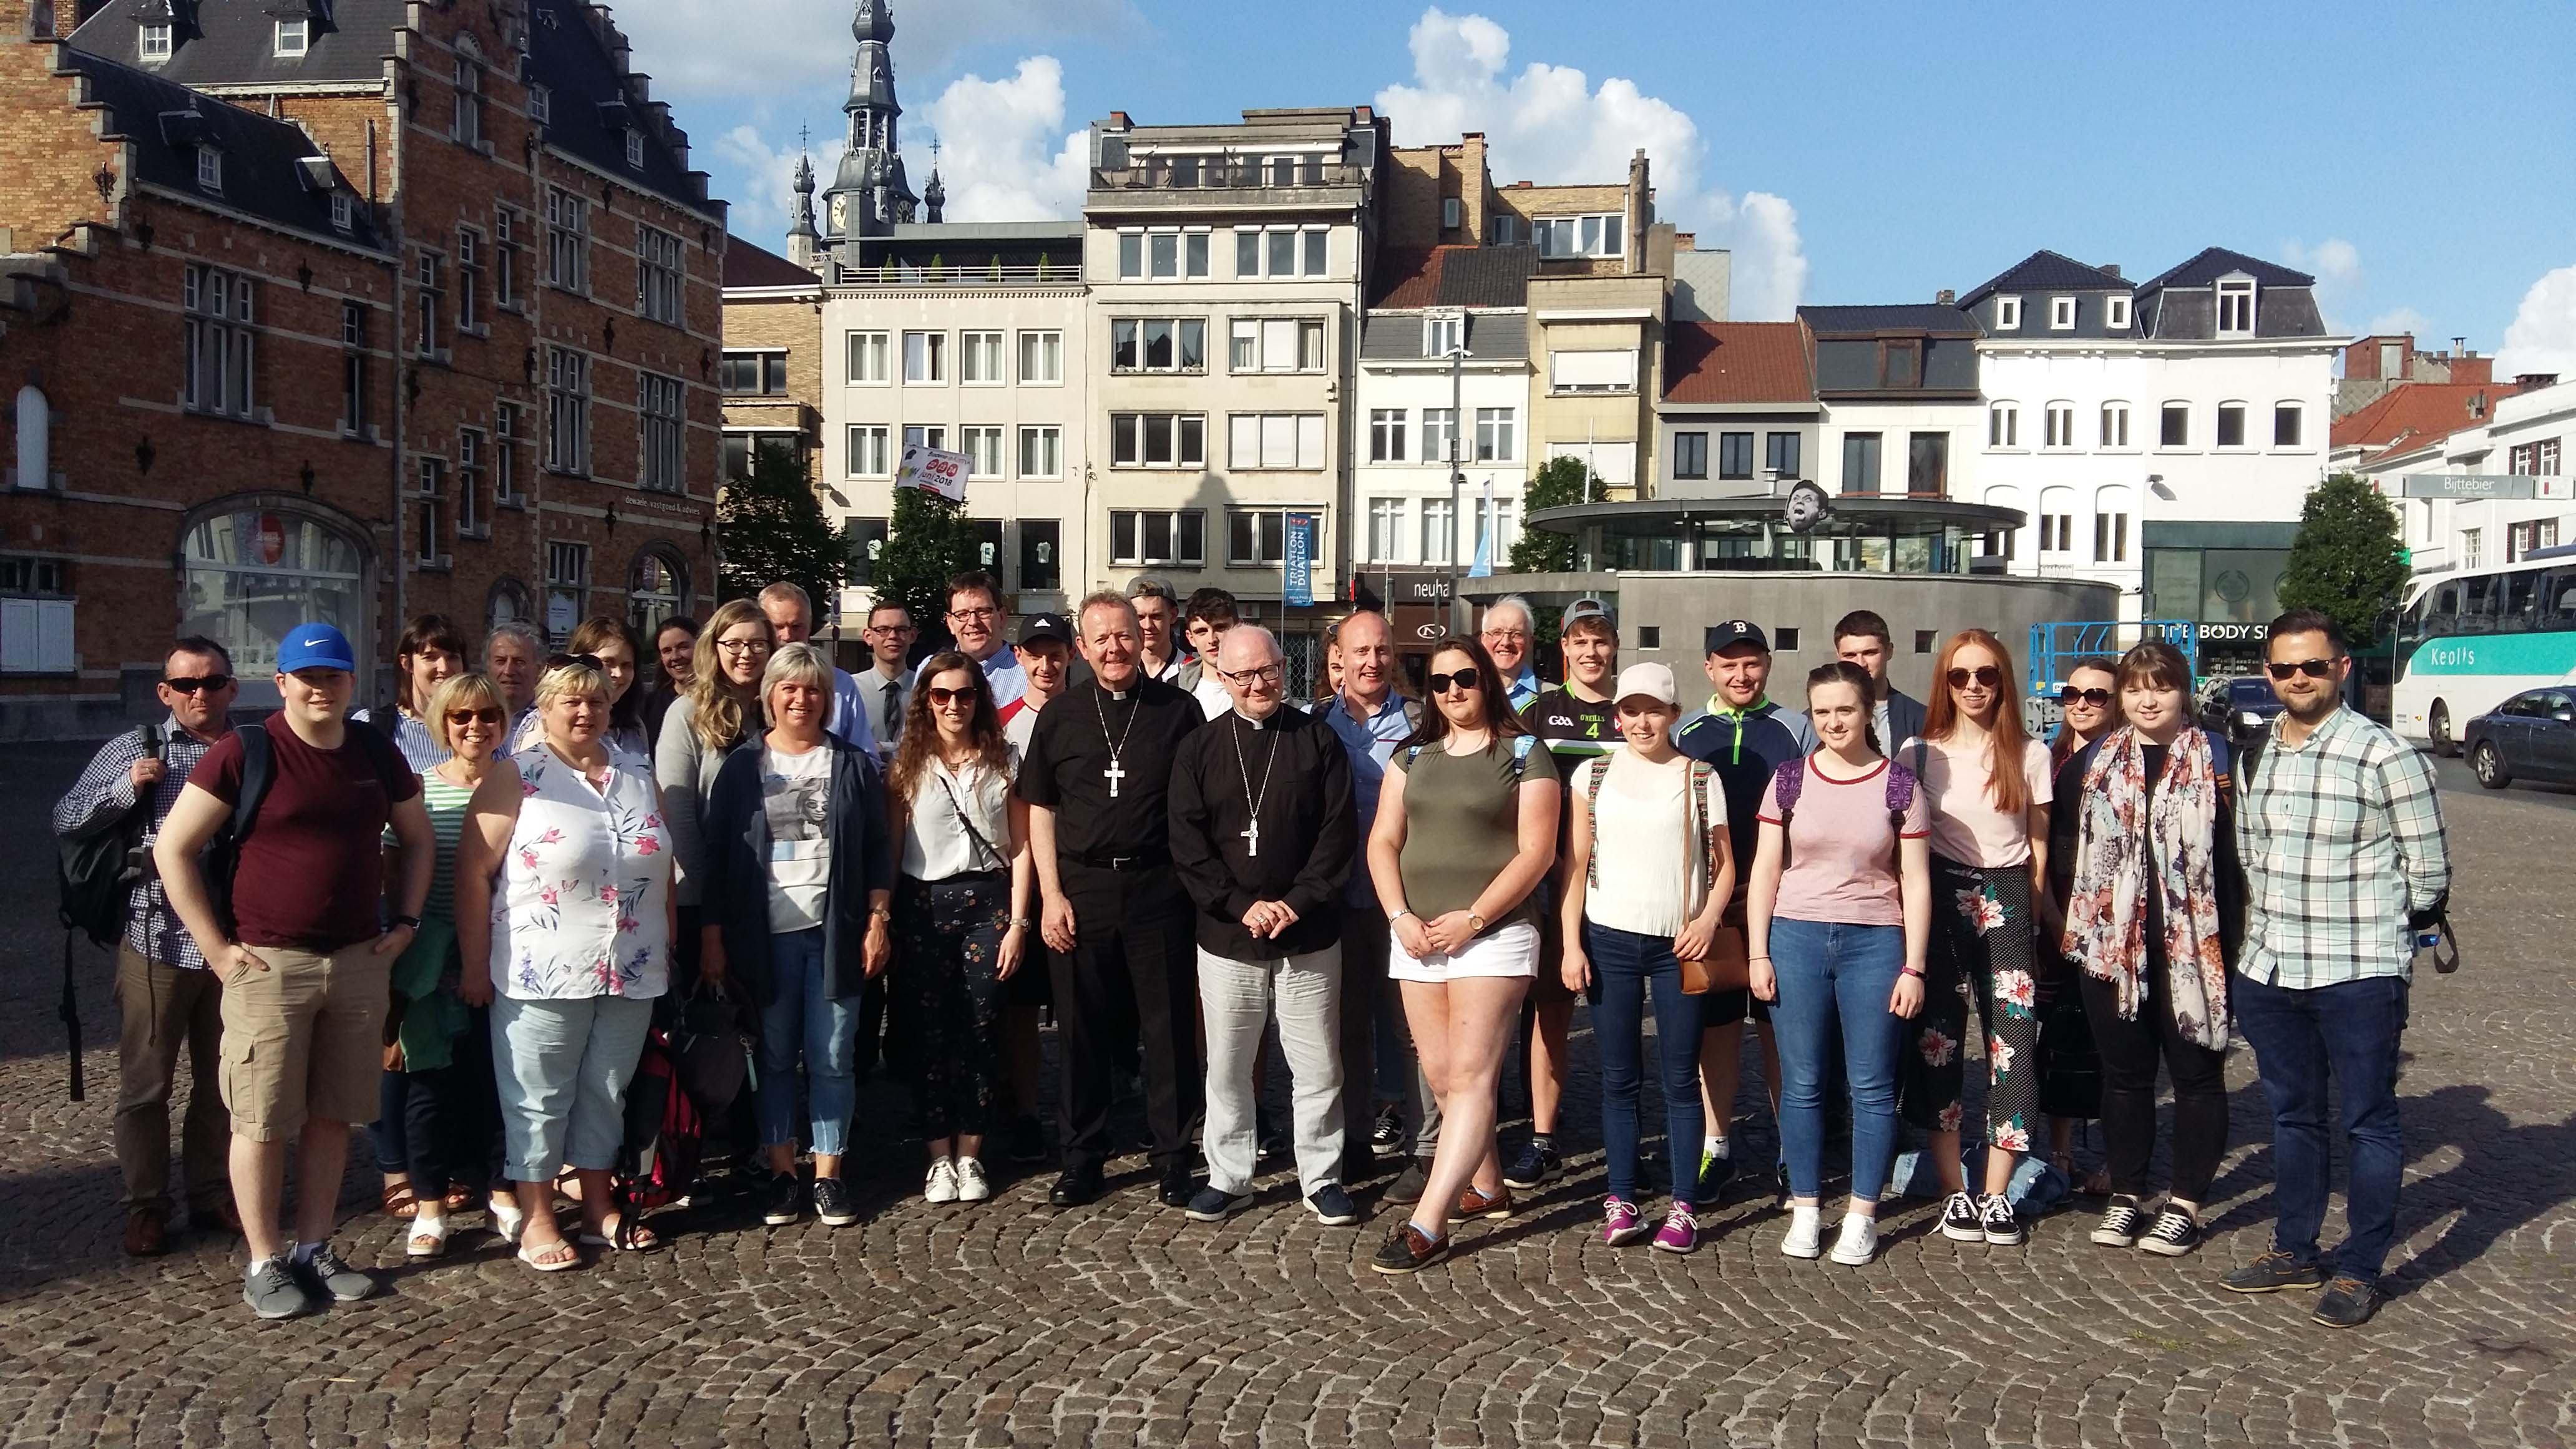 A visit to Kortrijk, Belgium, as part of the cross-community pilgrimage of hope.